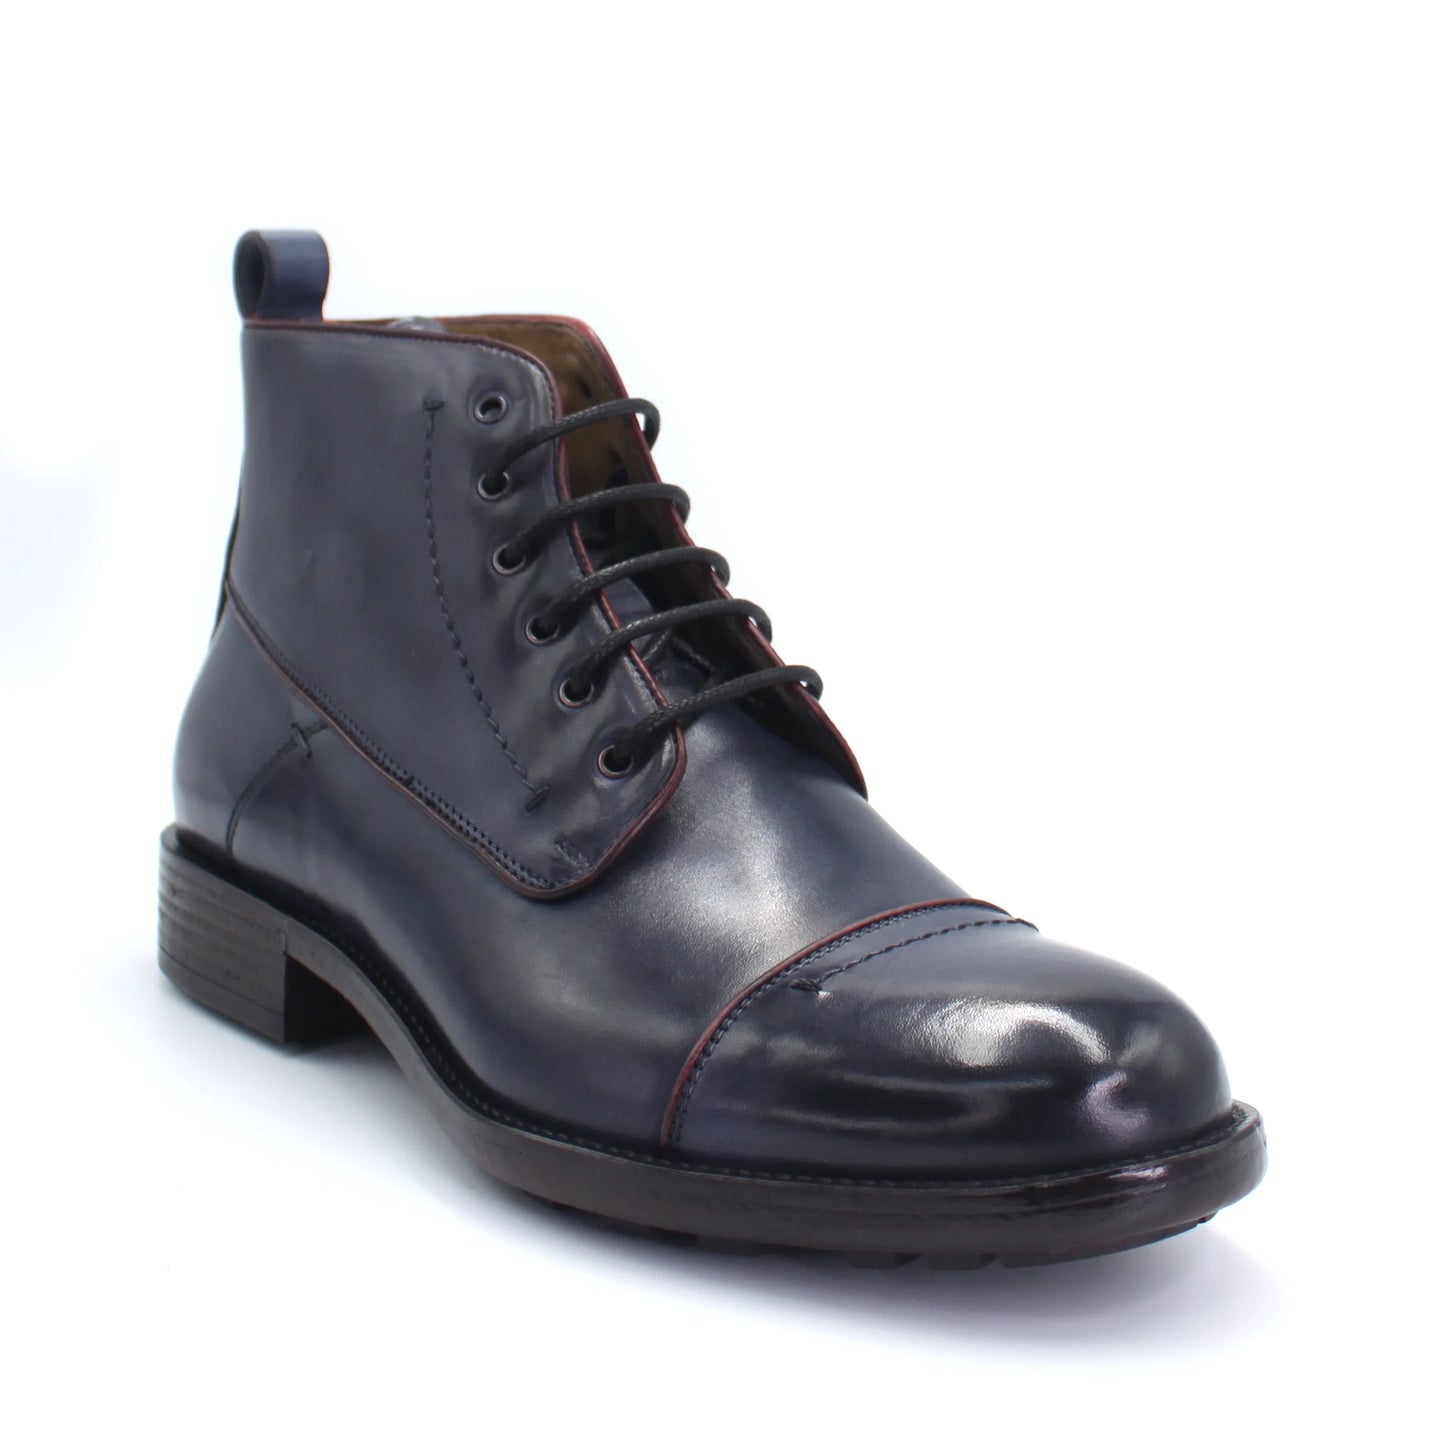 Shop Handmade Italian Leather Lace-Up Boot in  Delave Bluette (10876) or browse our range of hand-made Italian boots for men in leather or suede in-store at Aliverti Durban or Cape Town, or shop online. We deliver in South Africa & offer multiple payment plans as well as accept multiple safe & secure payment methods.